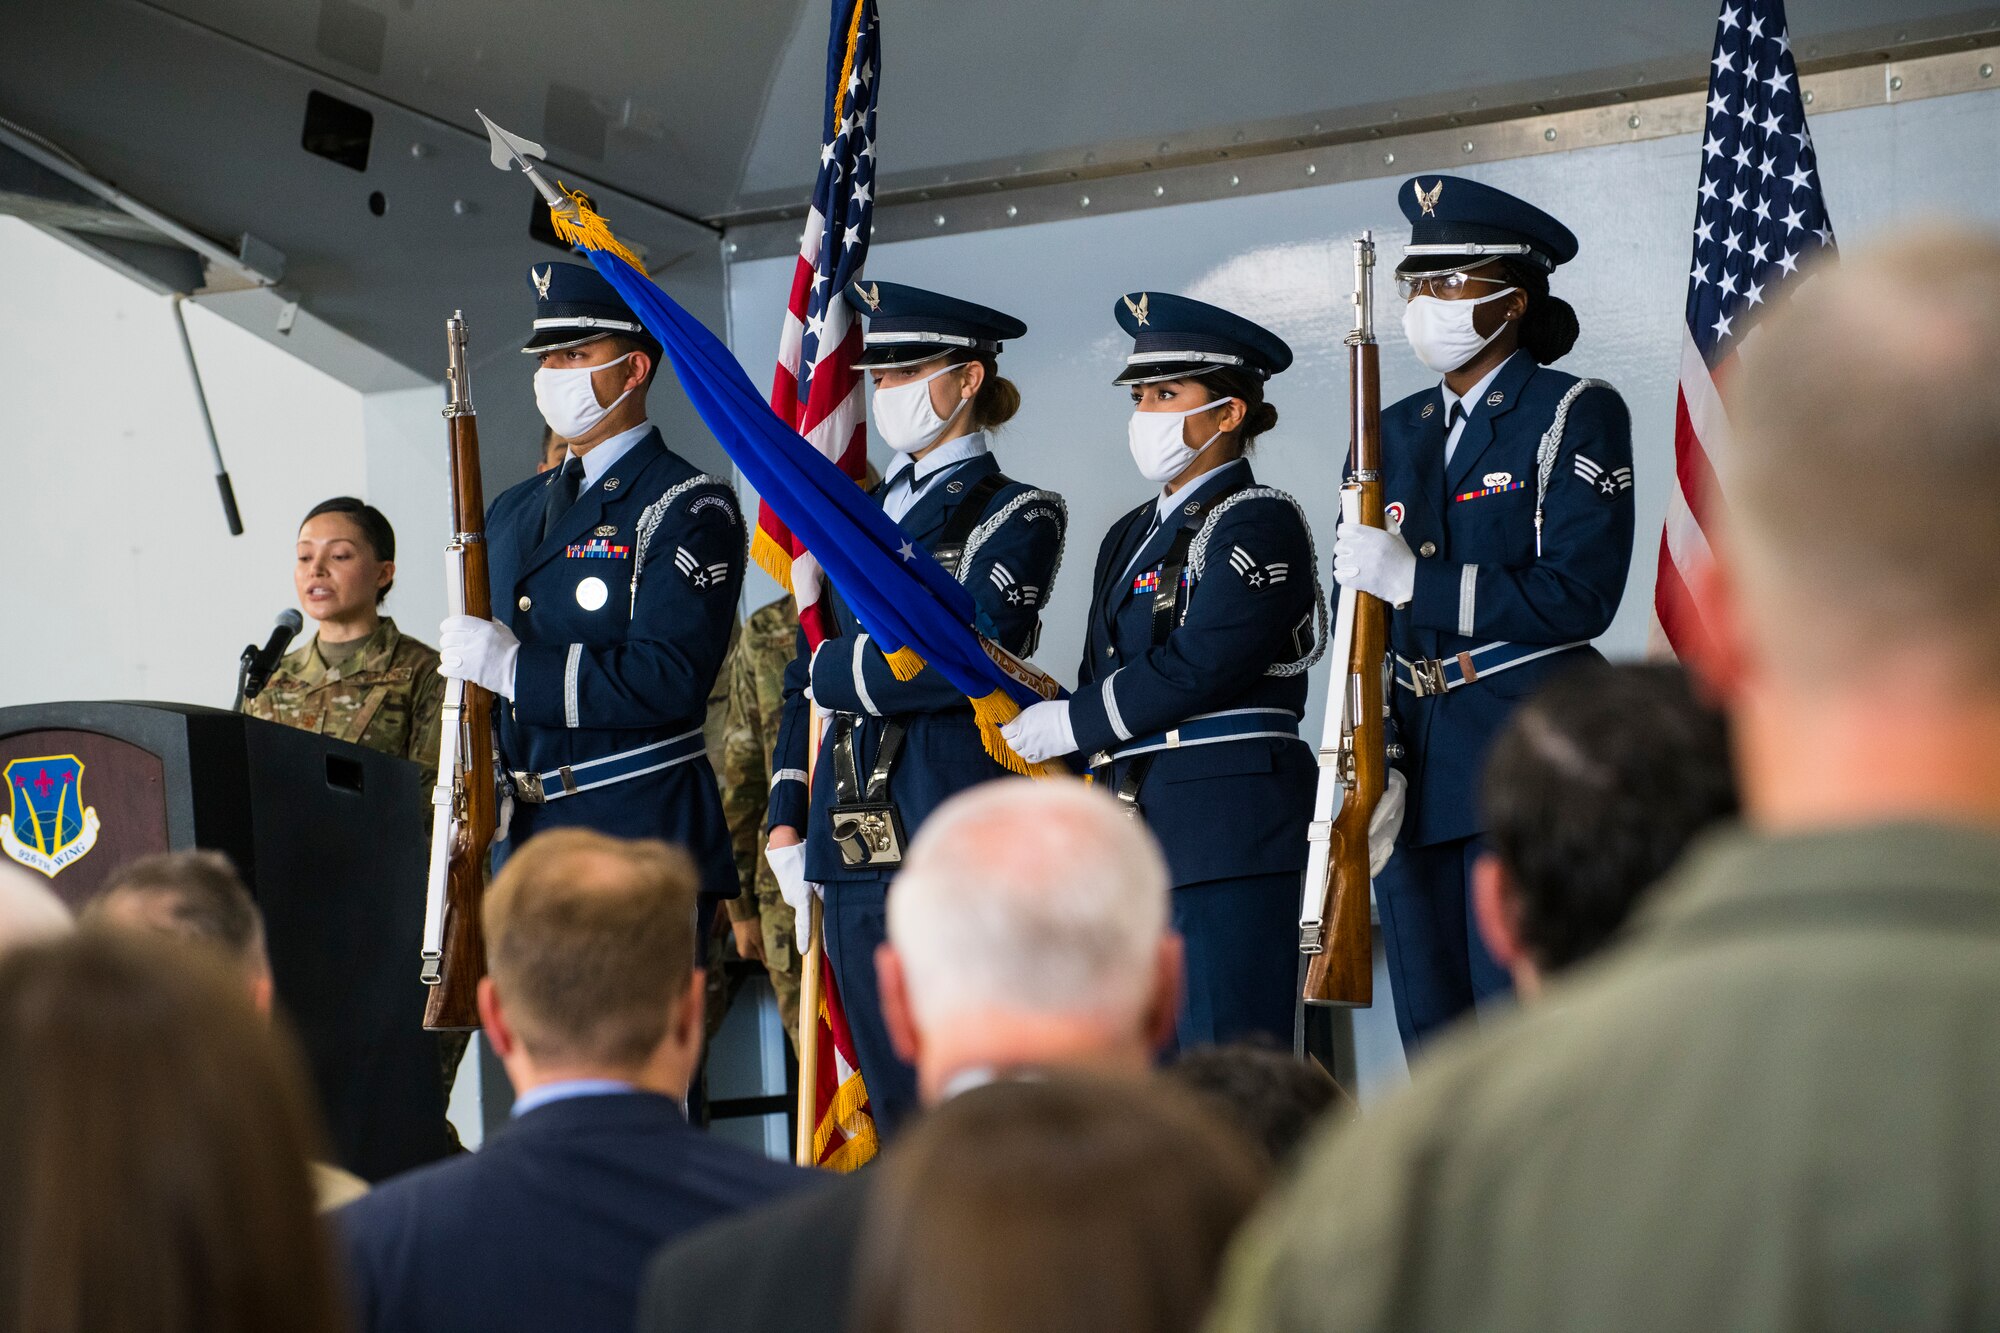 U.S. Air Force honor guard members post the Colors during the 926th Wing change of command ceremony June 13, 2021 at Nellis Air Force Base, Nevada. (U.S. Air Force photo by Senior Airman Brett Clashman)